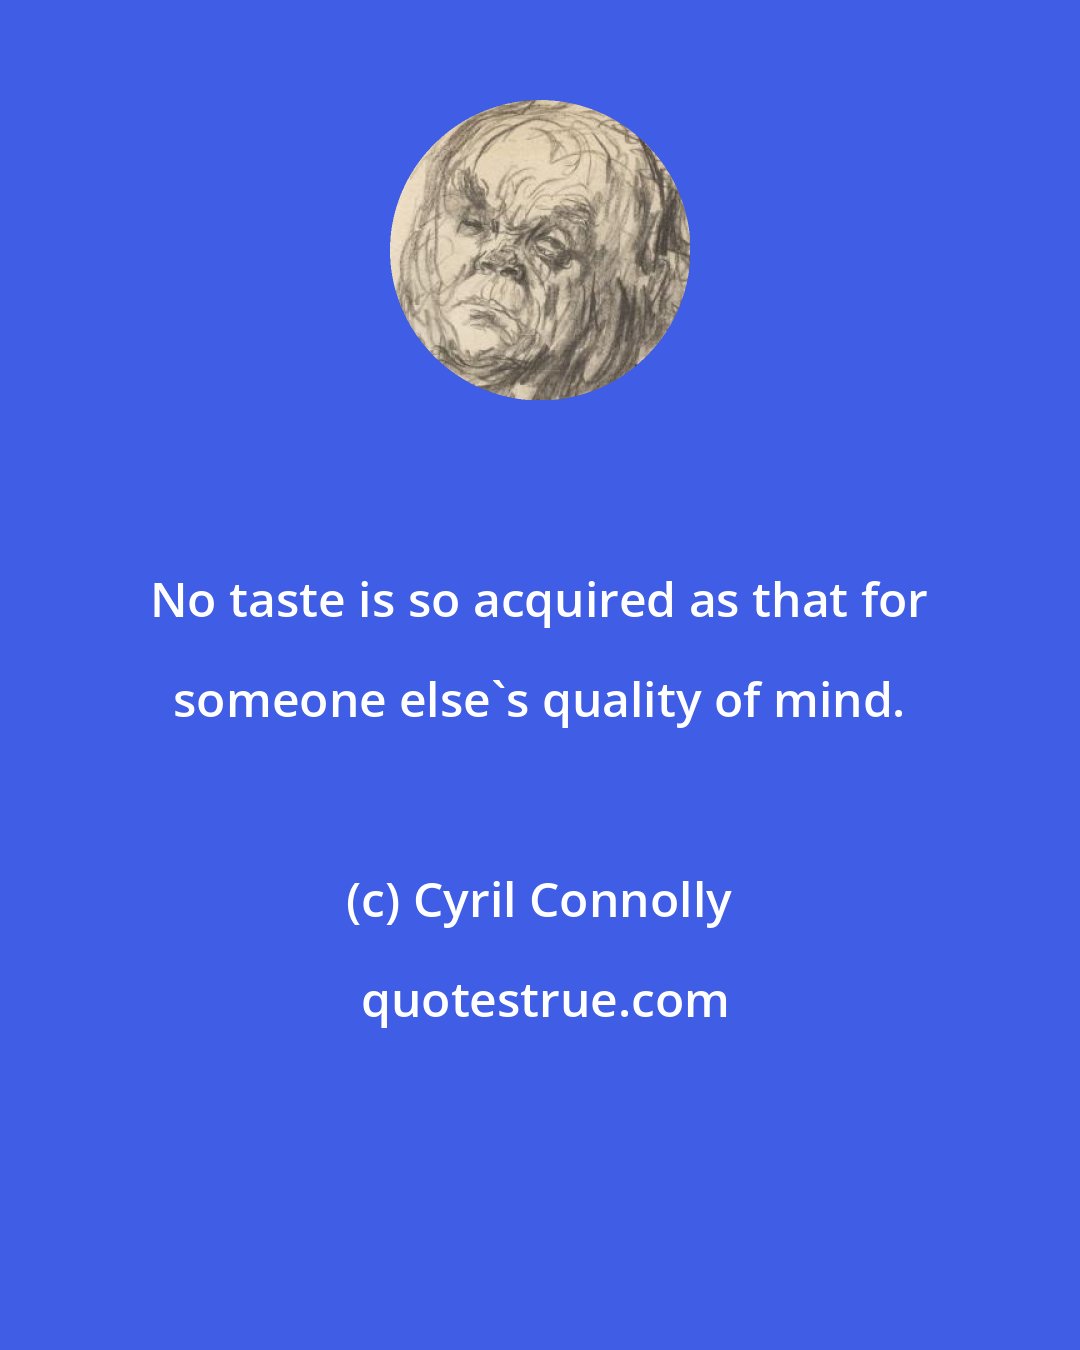 Cyril Connolly: No taste is so acquired as that for someone else's quality of mind.